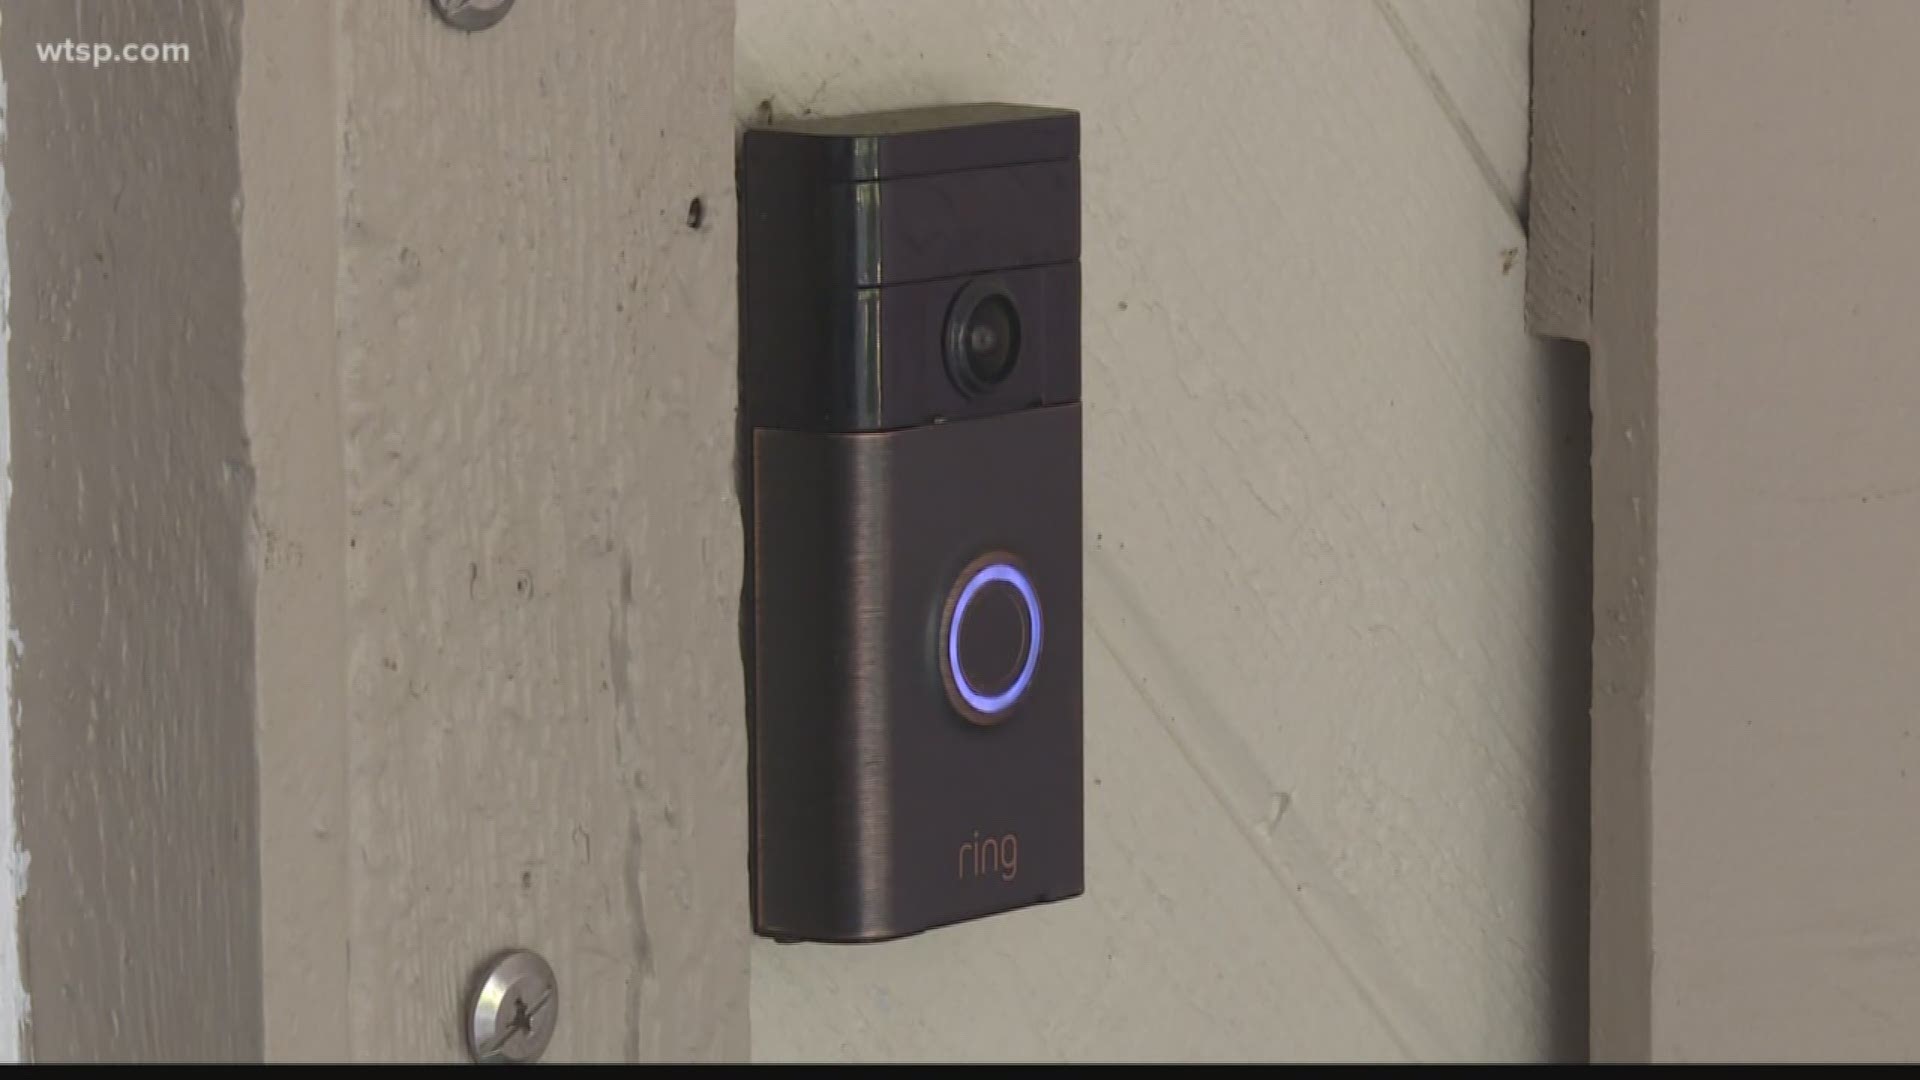 Thousands of people around the Tampa Bay area have gone high-tech when it comes to their doorbell and surveillance systems around their own homes.

But now, the Ring and gadgets like it have been getting some criticism that might have people weighing whether that sense of security is worth it

For Kristen Barron, it’s a “yes”.

“It’s so worth it just to have the peace of mind,” said Barron after her system captured video she then shared with cops of a porch pirate swiping a package.